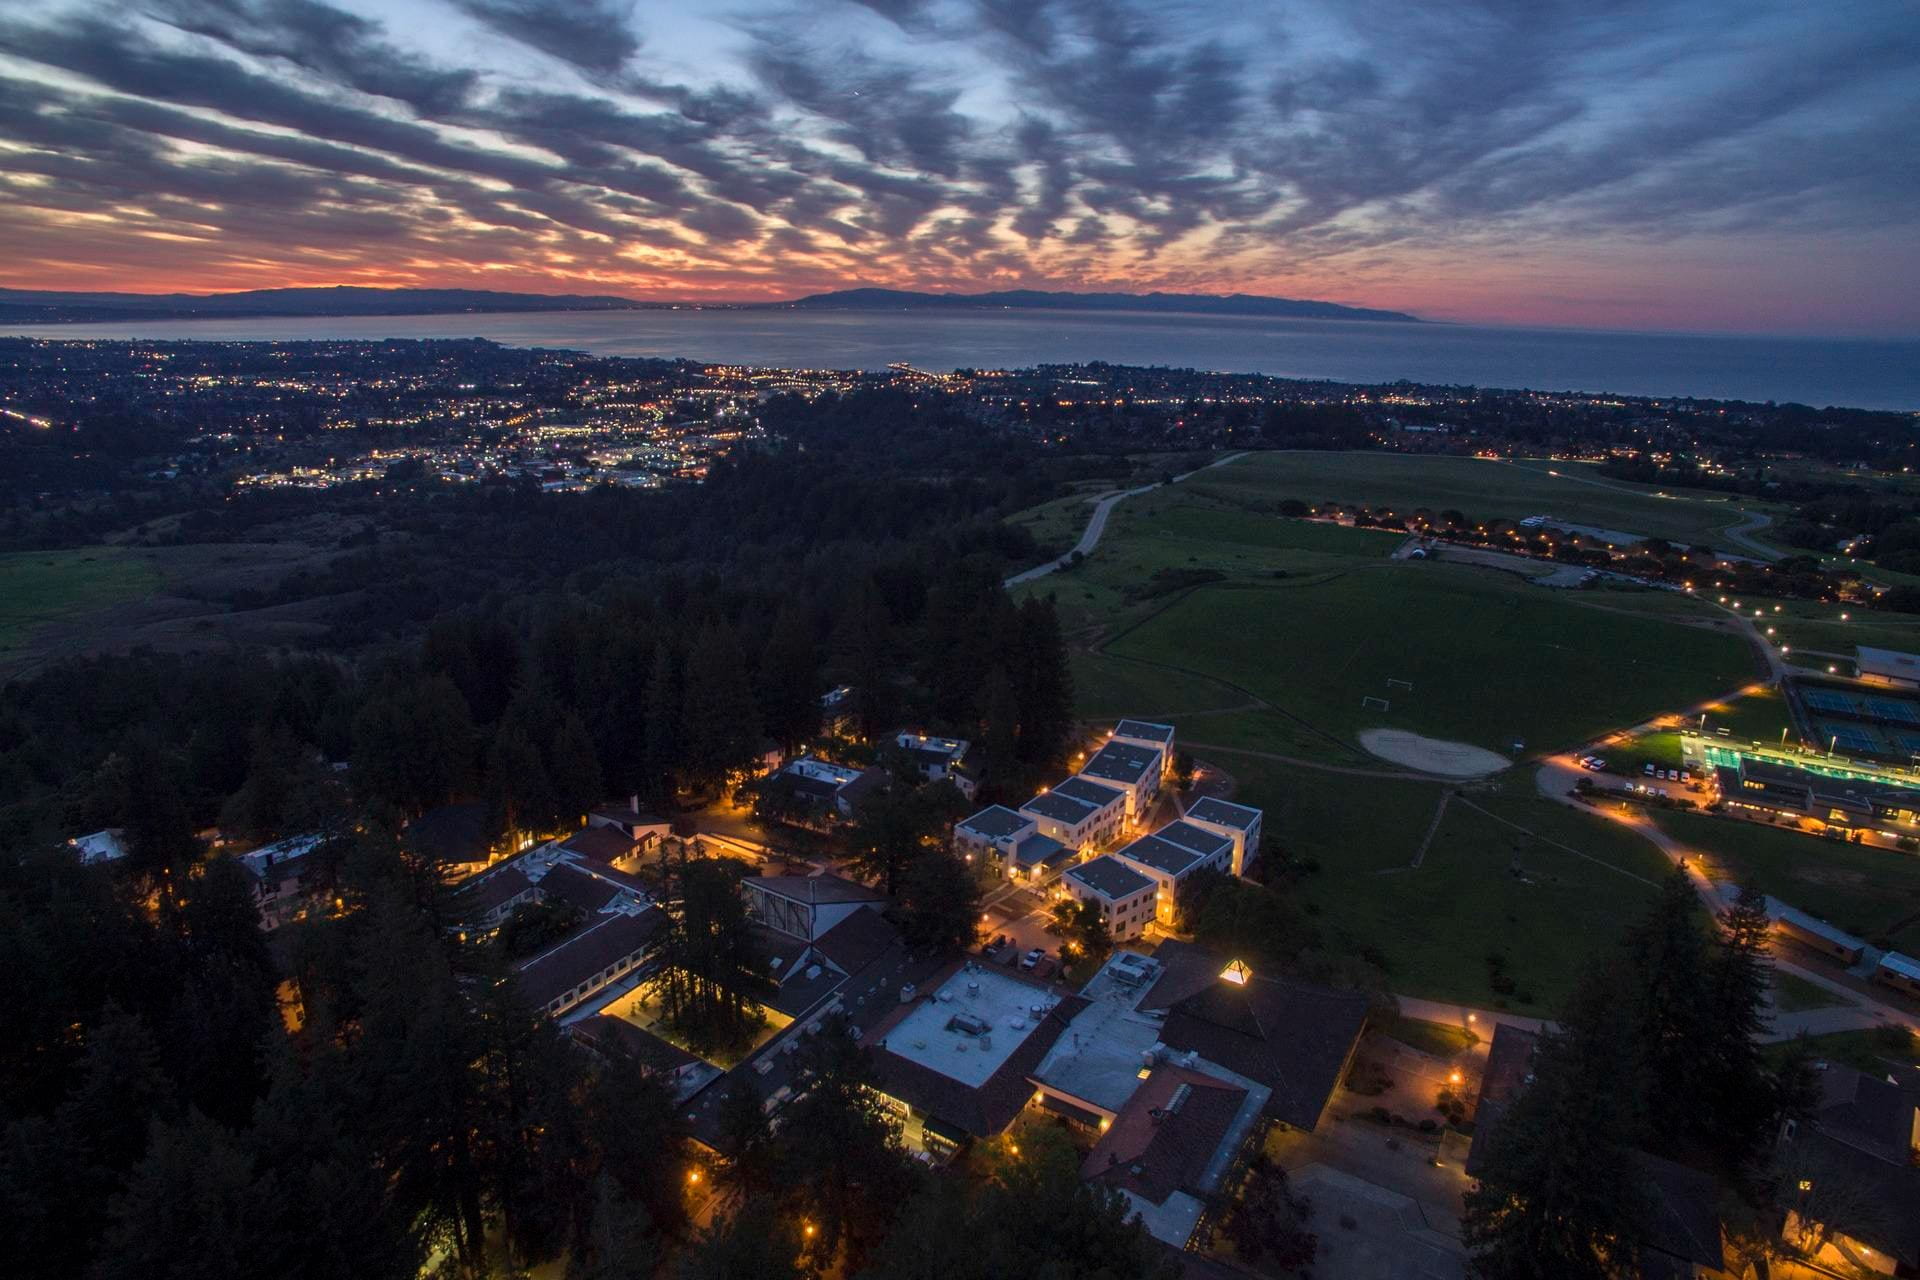 An aerial photo of the UCSC campus at sunset with cloud cover and campus buildings lit up.